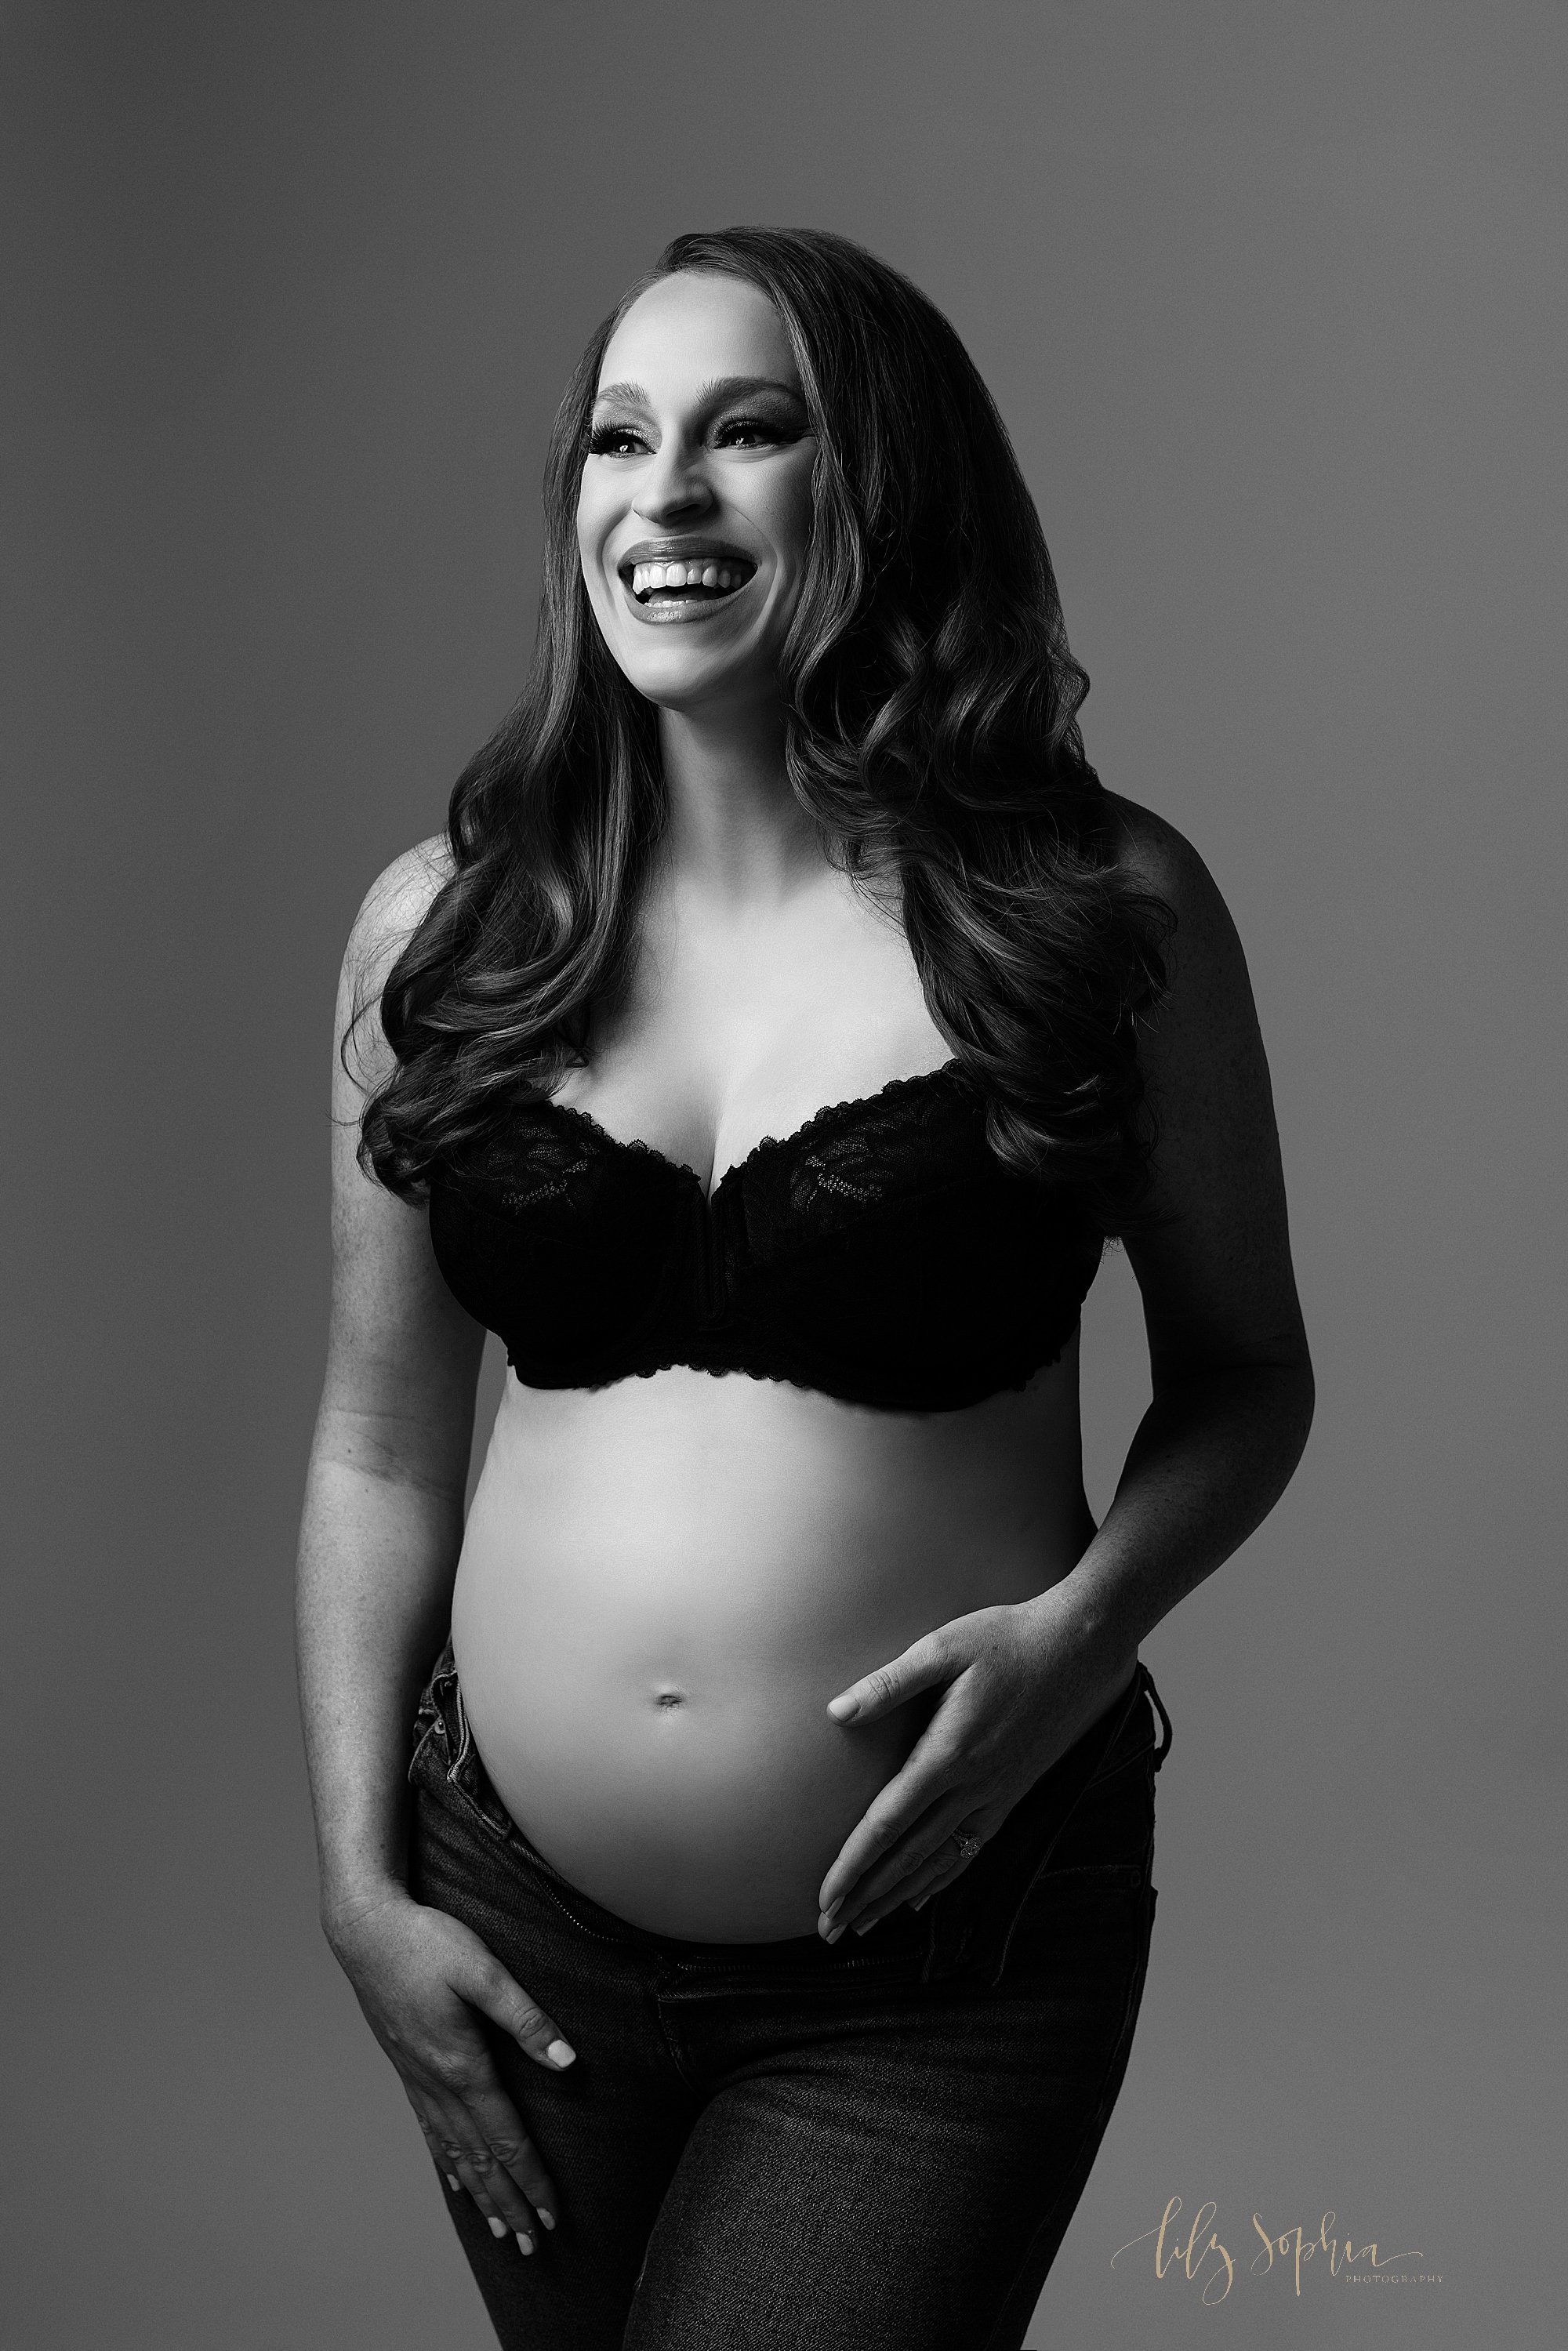  Maternity session in the modern maternity style with editorial lighting as the woman glows with a huge smile on her face as she stands in a photography studio wearing a black lace bra and unzipped jeans with her left hand on her bare belly and her r